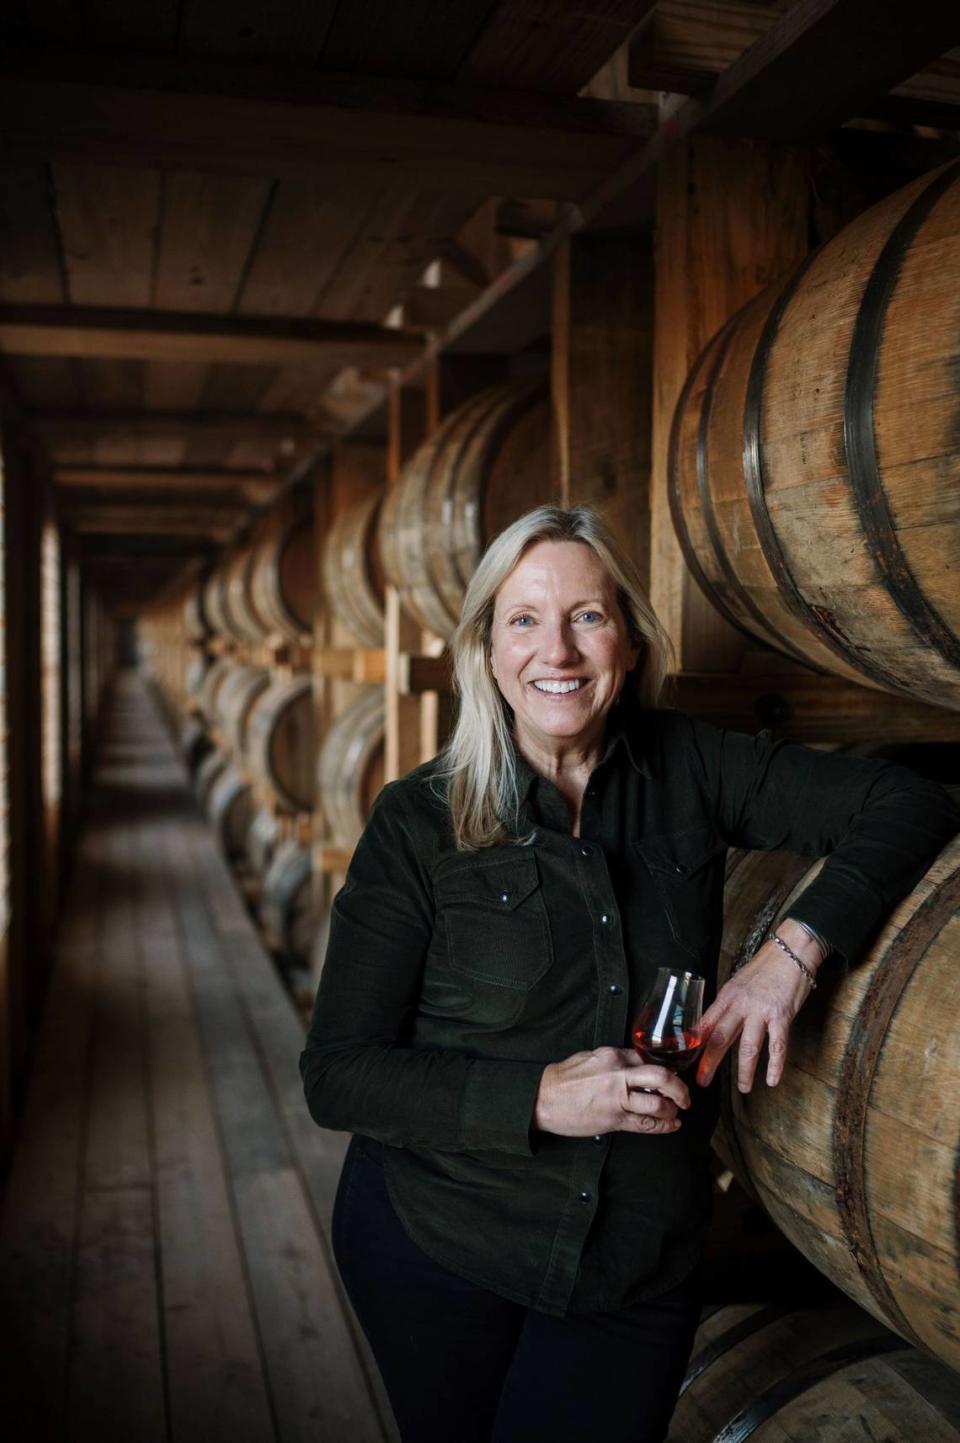 Lisa Wicker has been named the master distiller of the new Garrard County Distillery in Lancaster. Provided